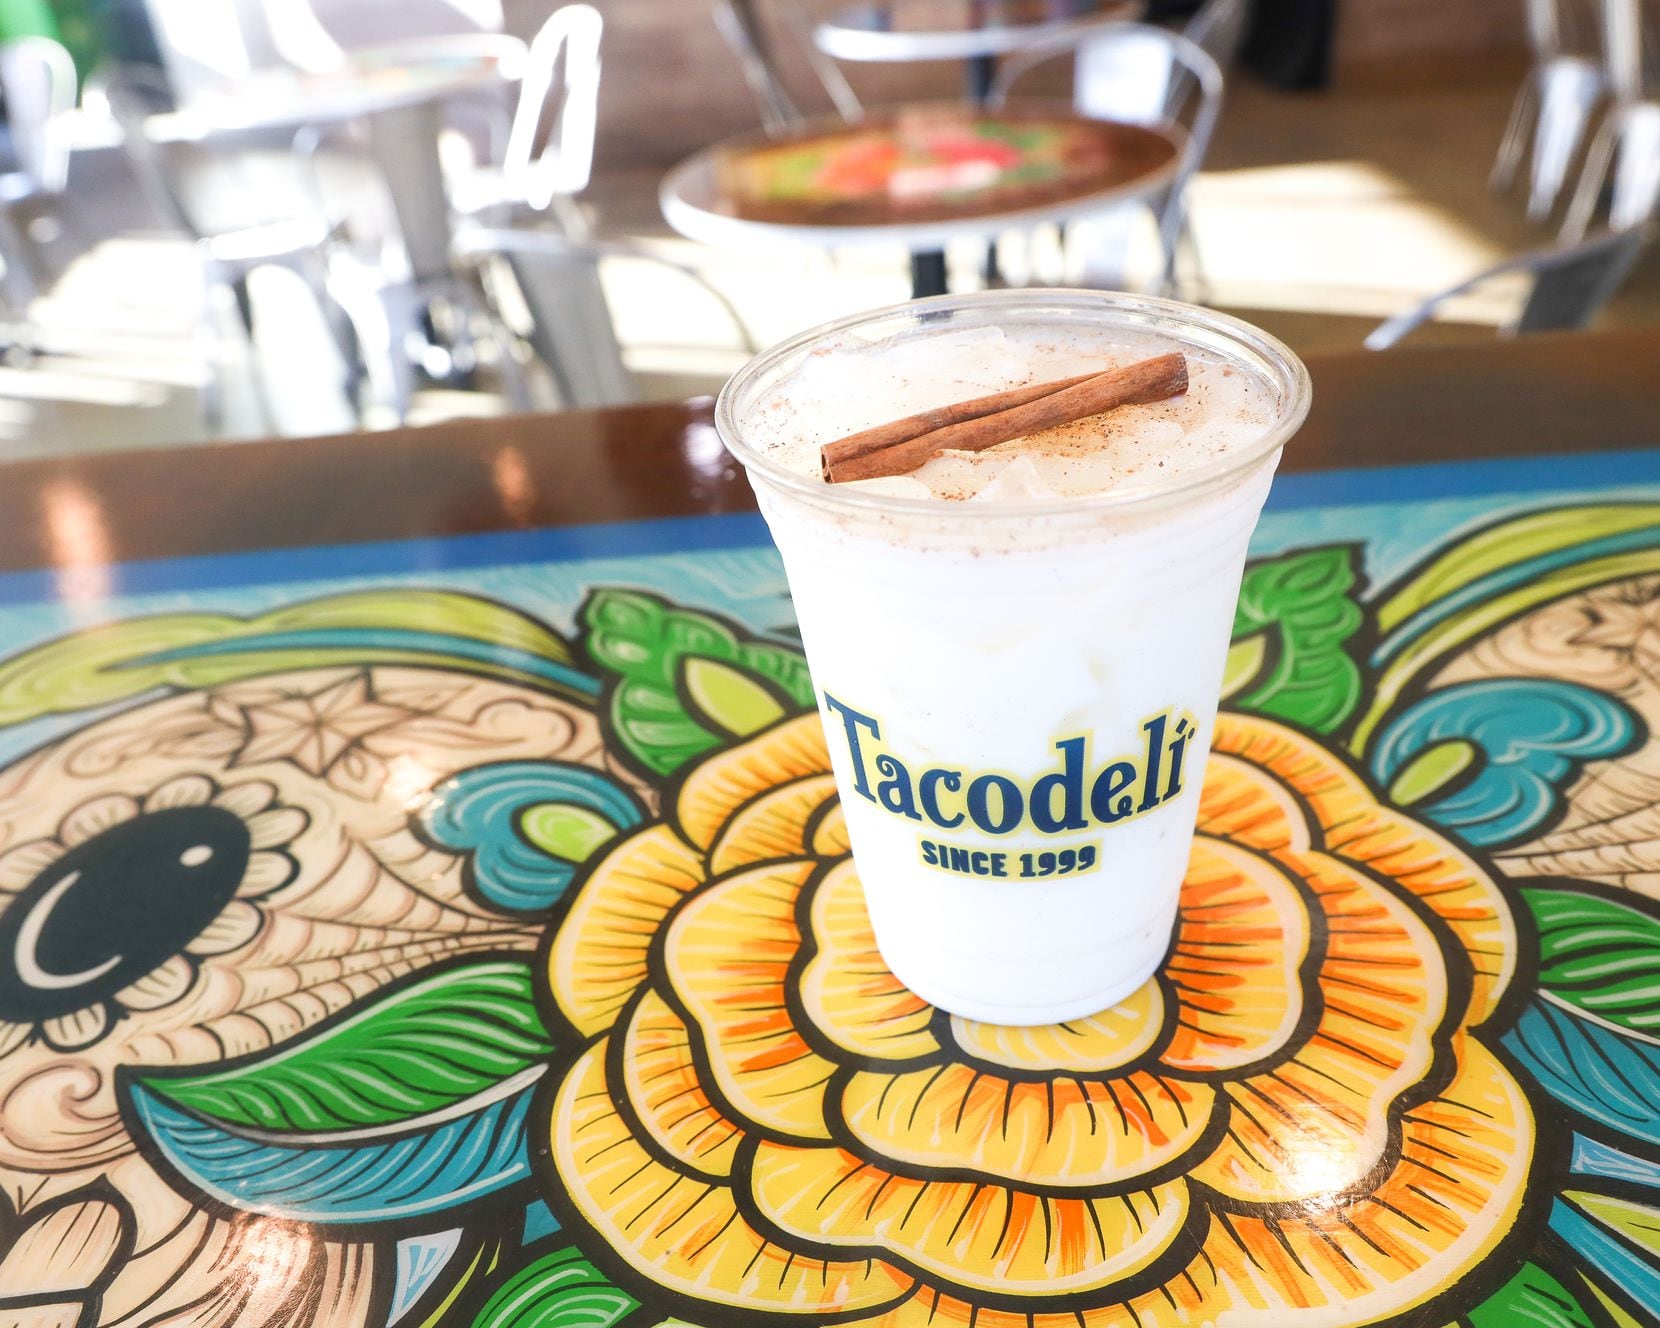 Tacodeli is offering spiked horchata for dine-in or to-go this holiday season.